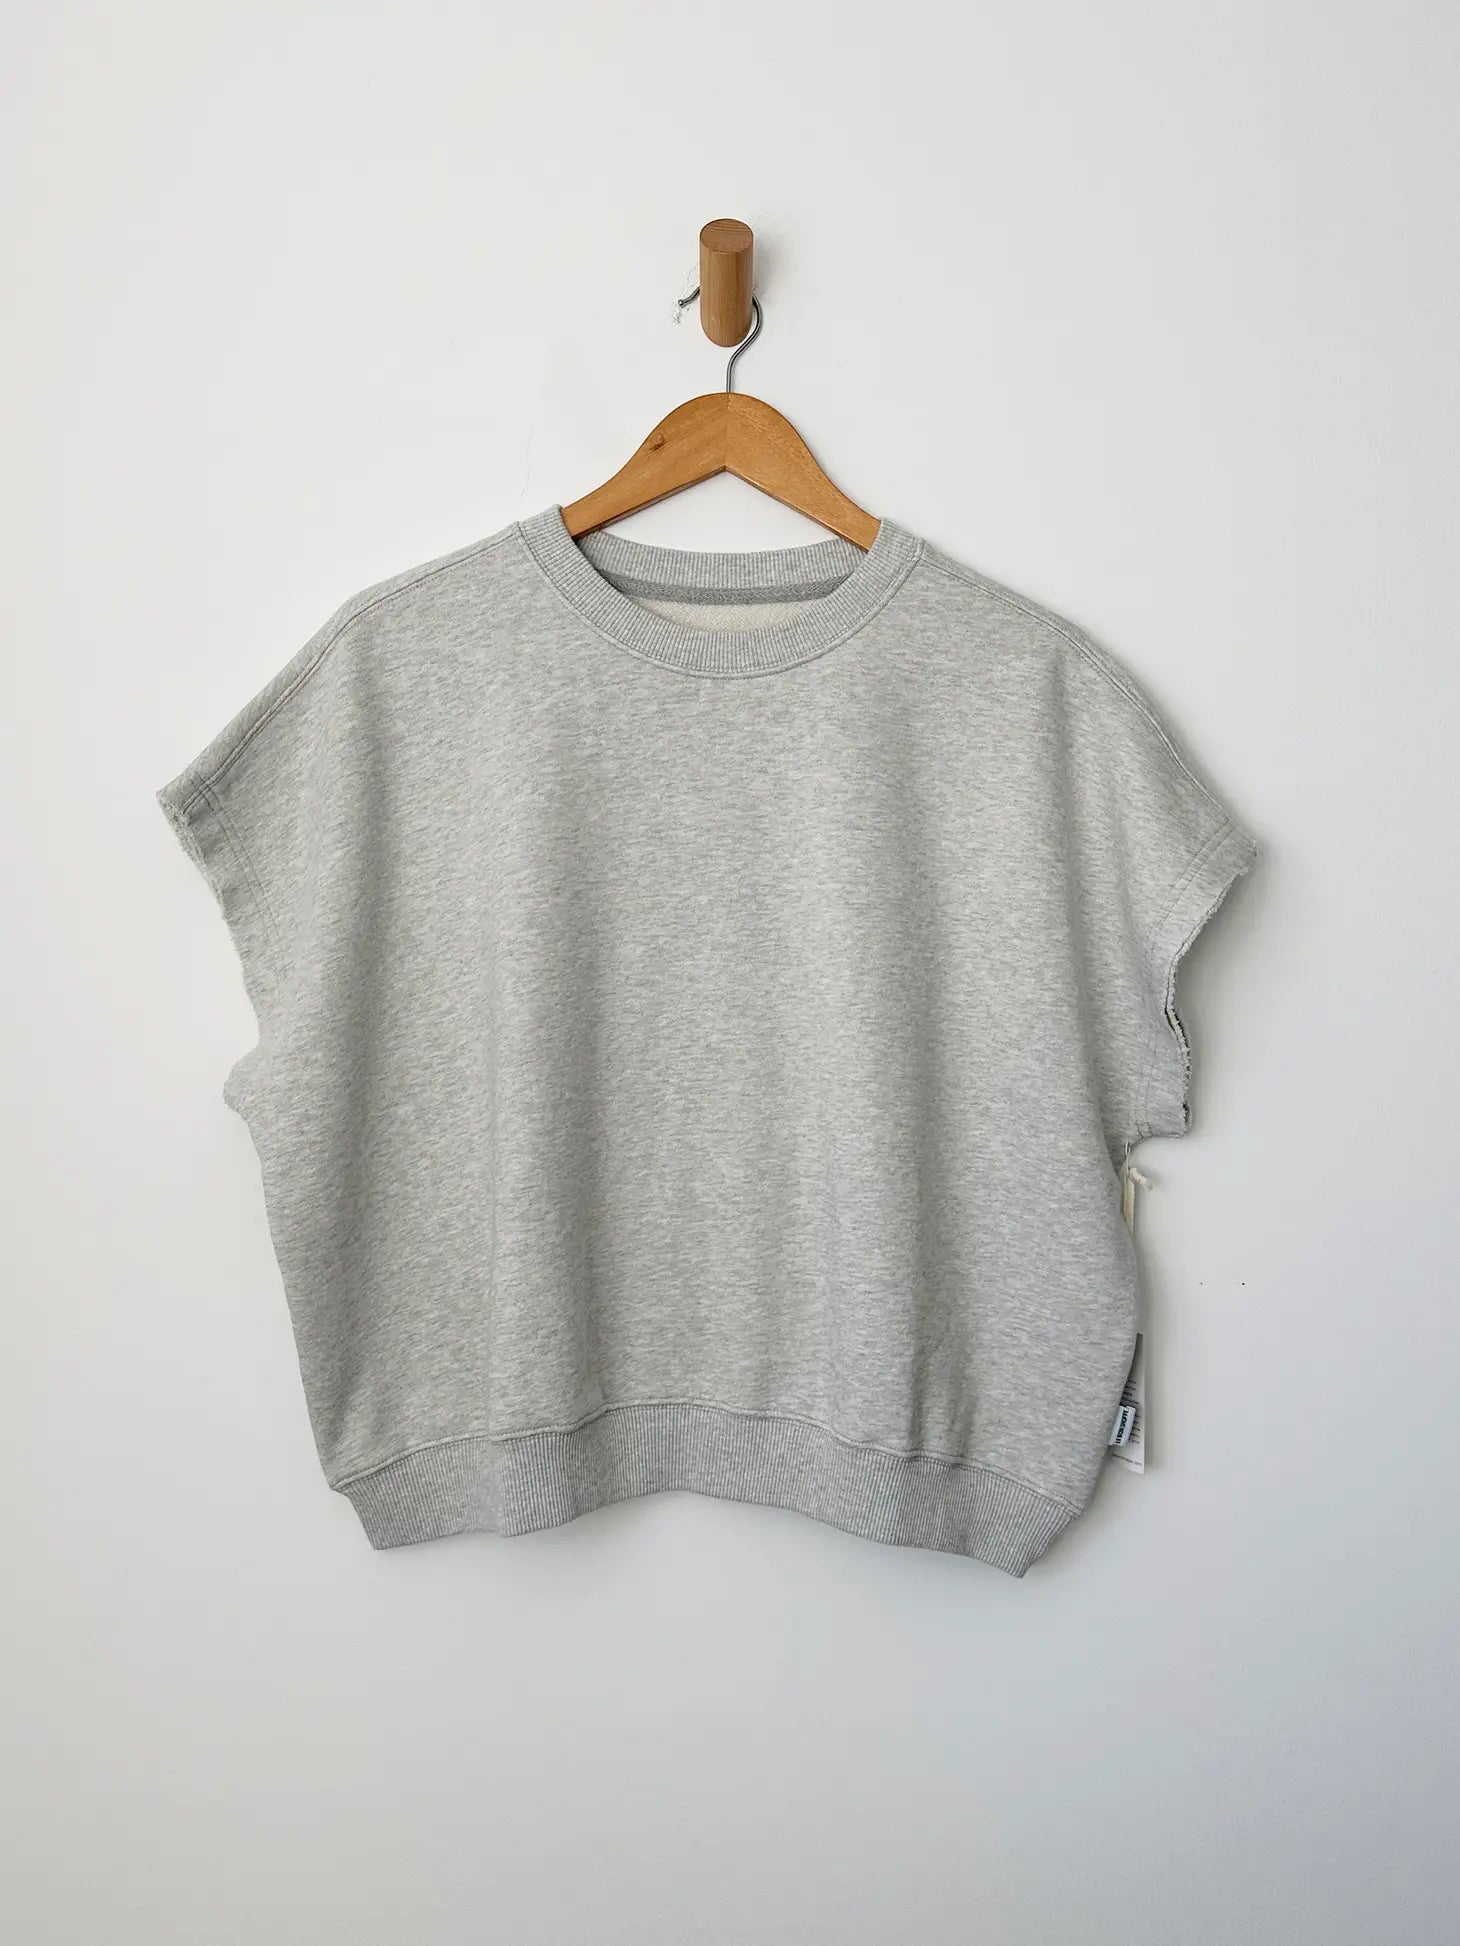 Sophie Top - French Terry/Heather Gray